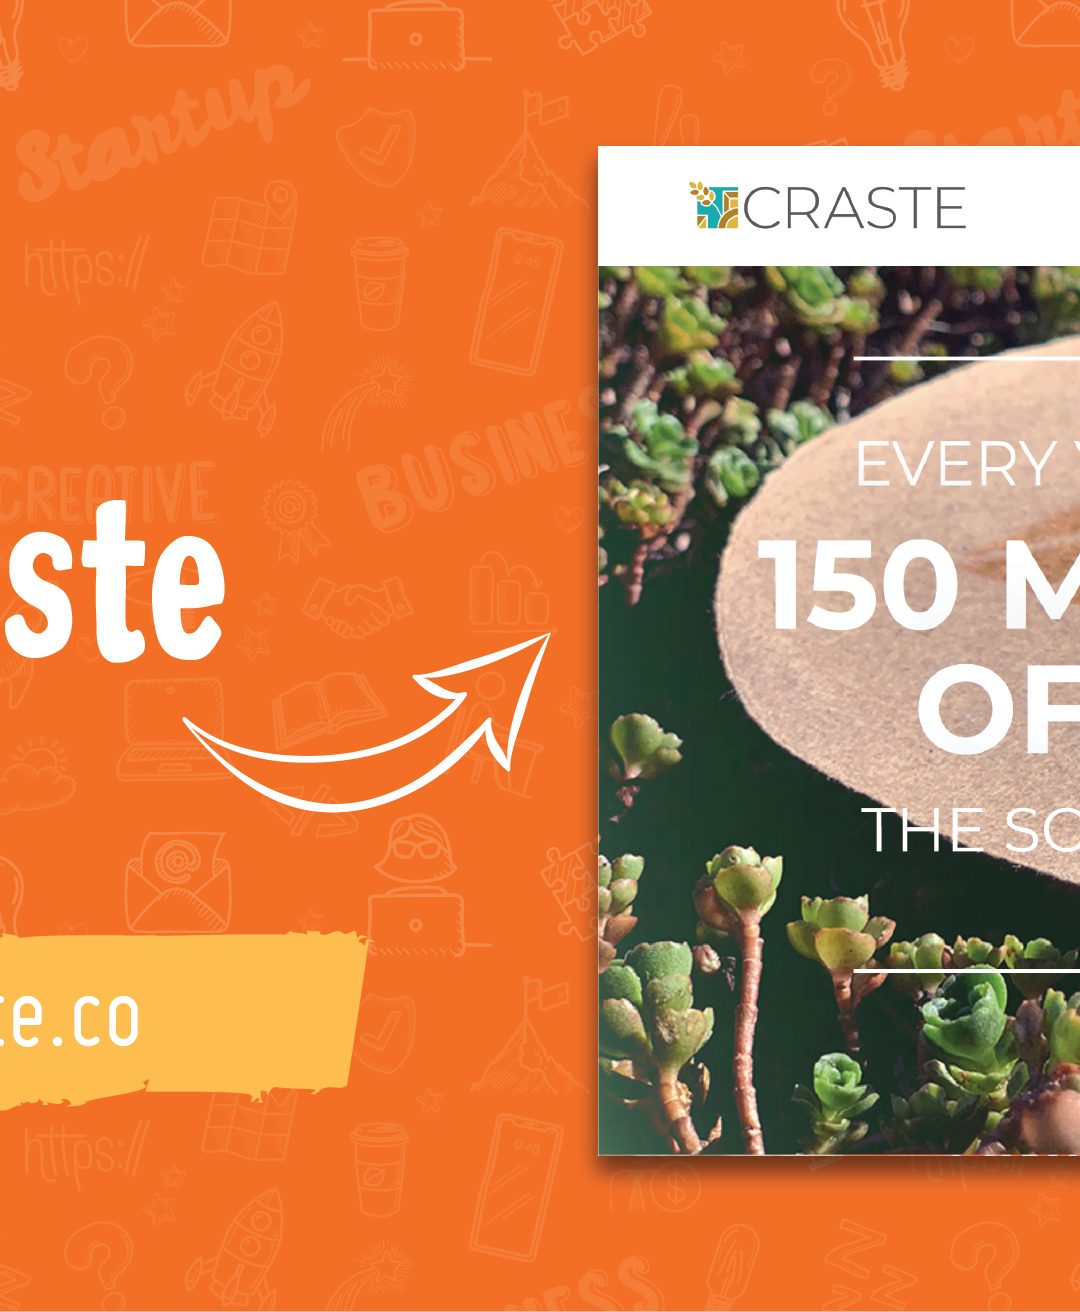 How Eco-Friendly Ventures Like Craste.co Can Have a Huge Impact